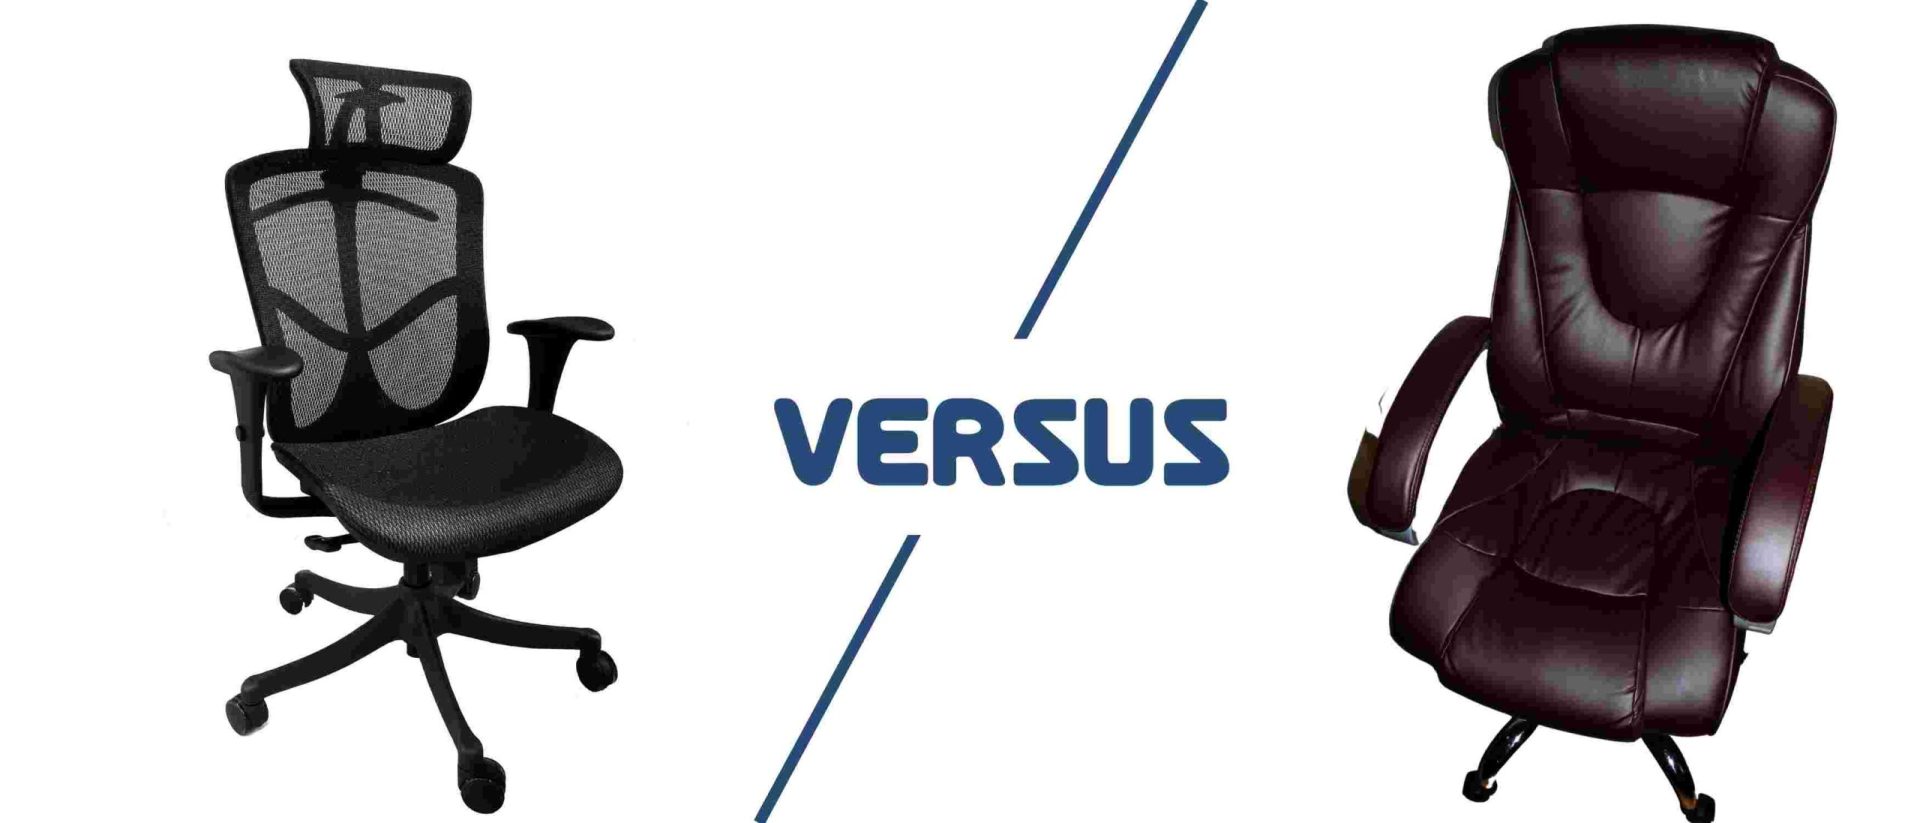 Mesh vs Leather Chair - which is better for you?